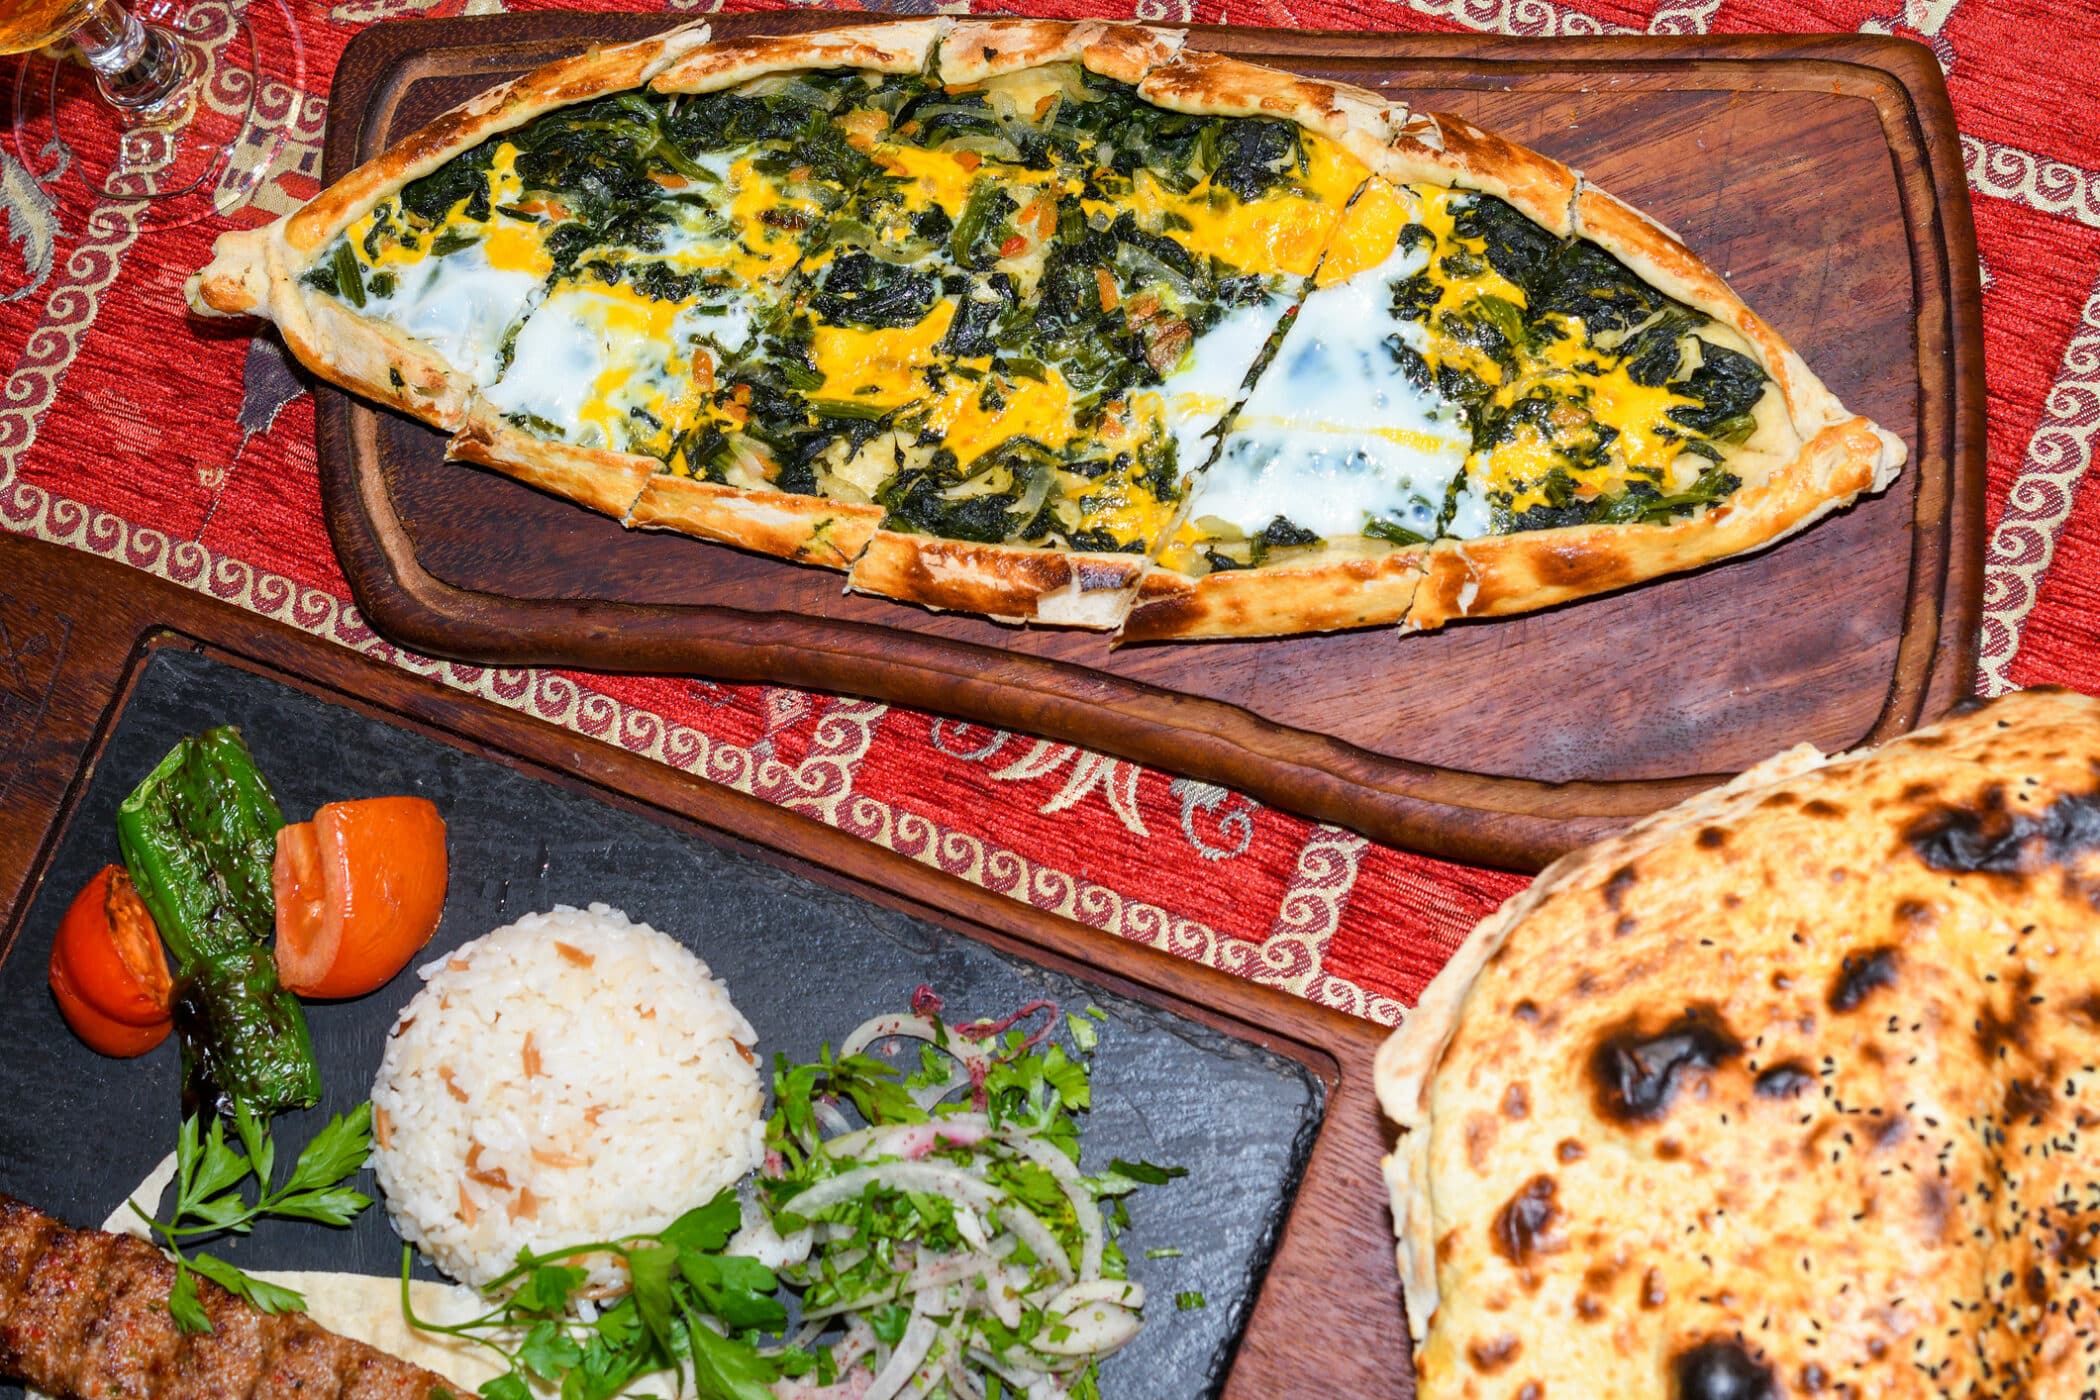 Spinach and egg pide, pita flat bread and puff hot lavash or lavas homebaked specialty